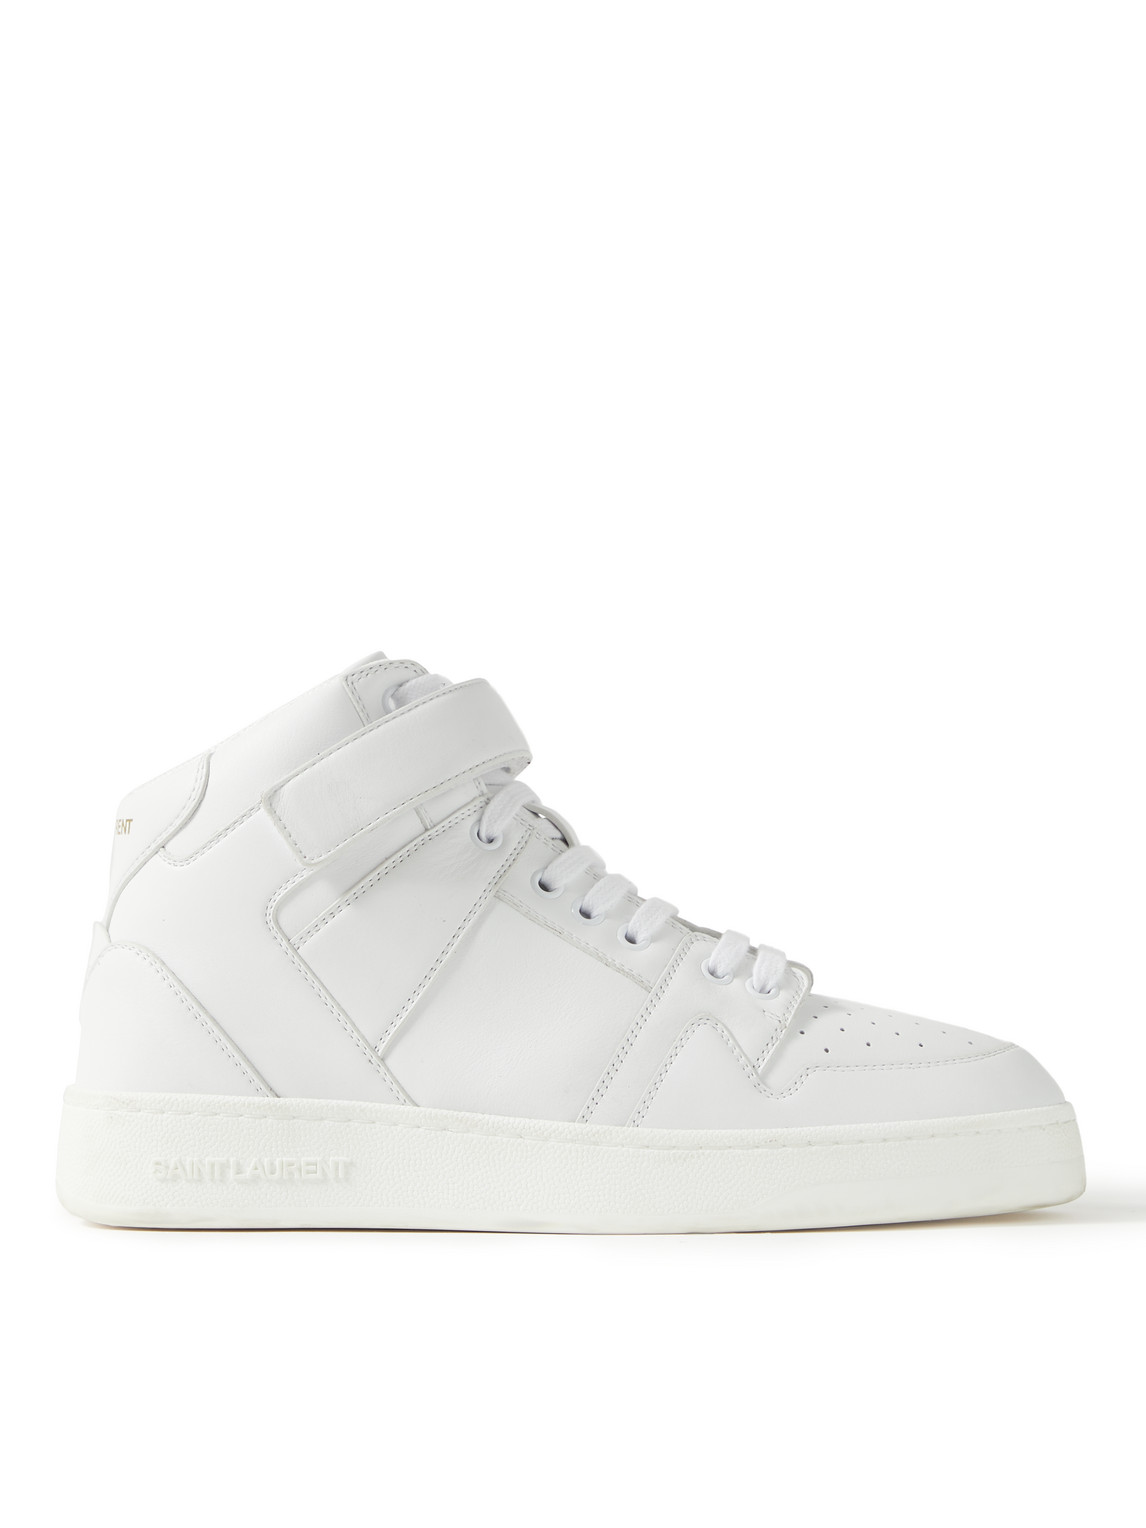 Saint Laurent Greenwich Leather High-top Sneakers In White